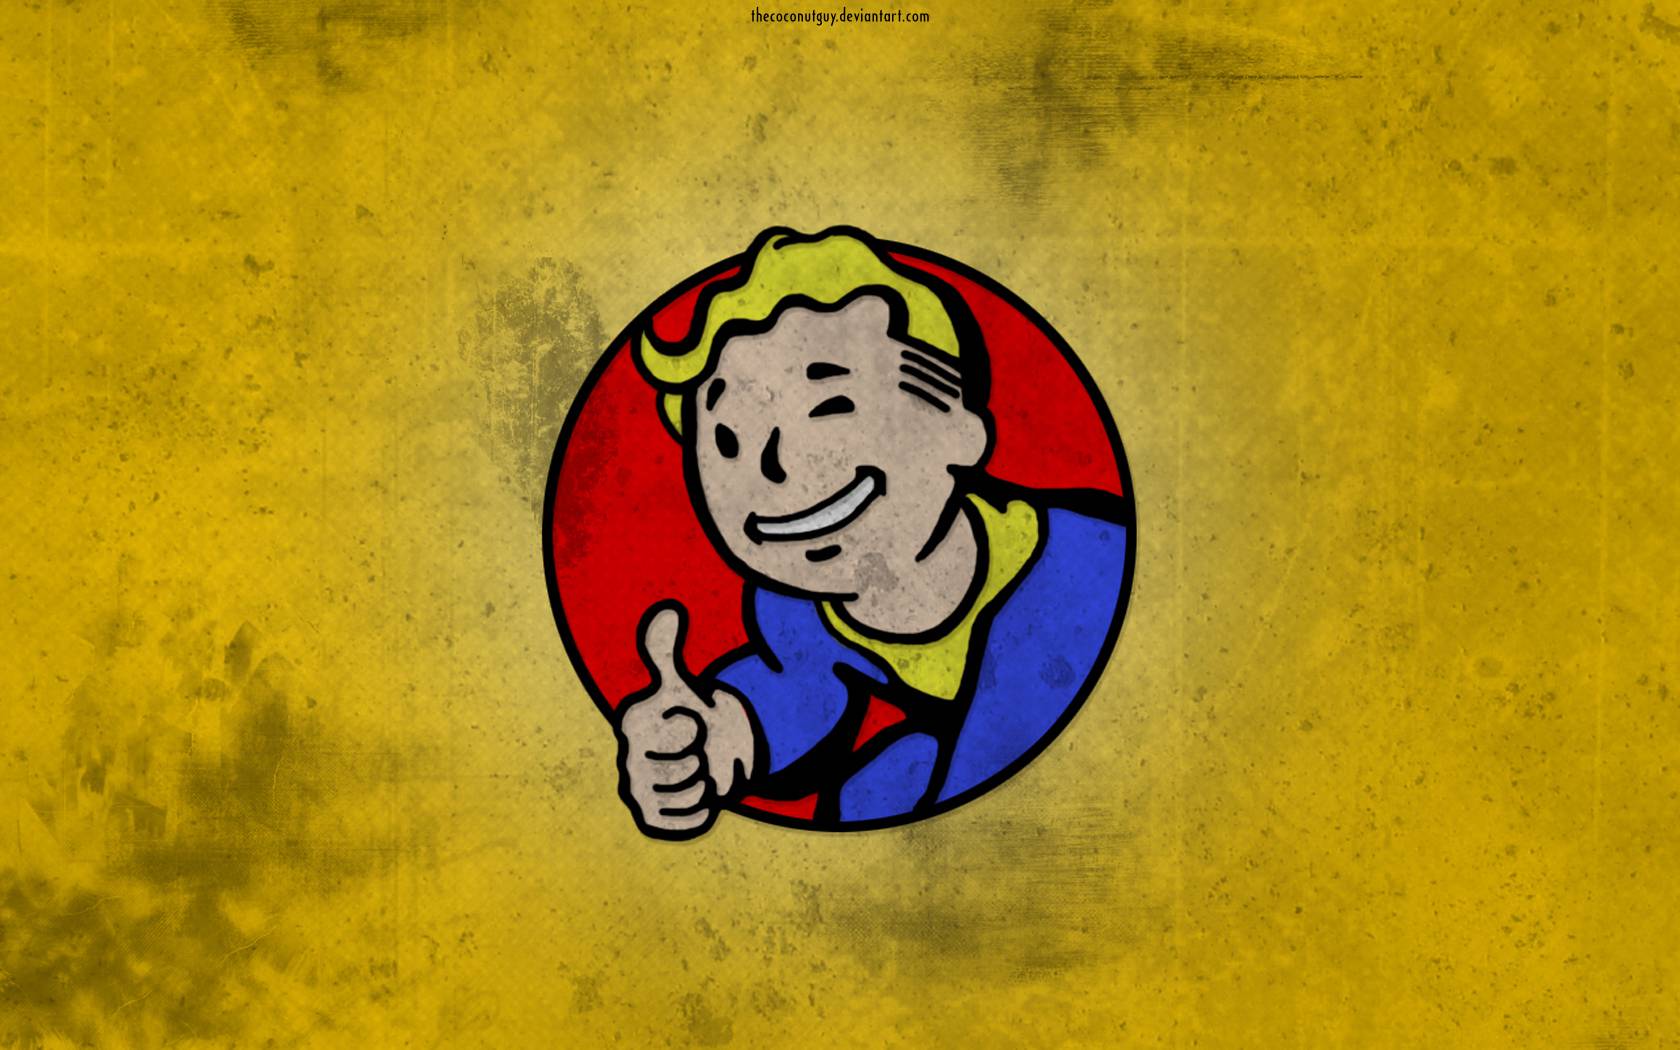 Vault Boy Wallpaper High Quality And Resolution